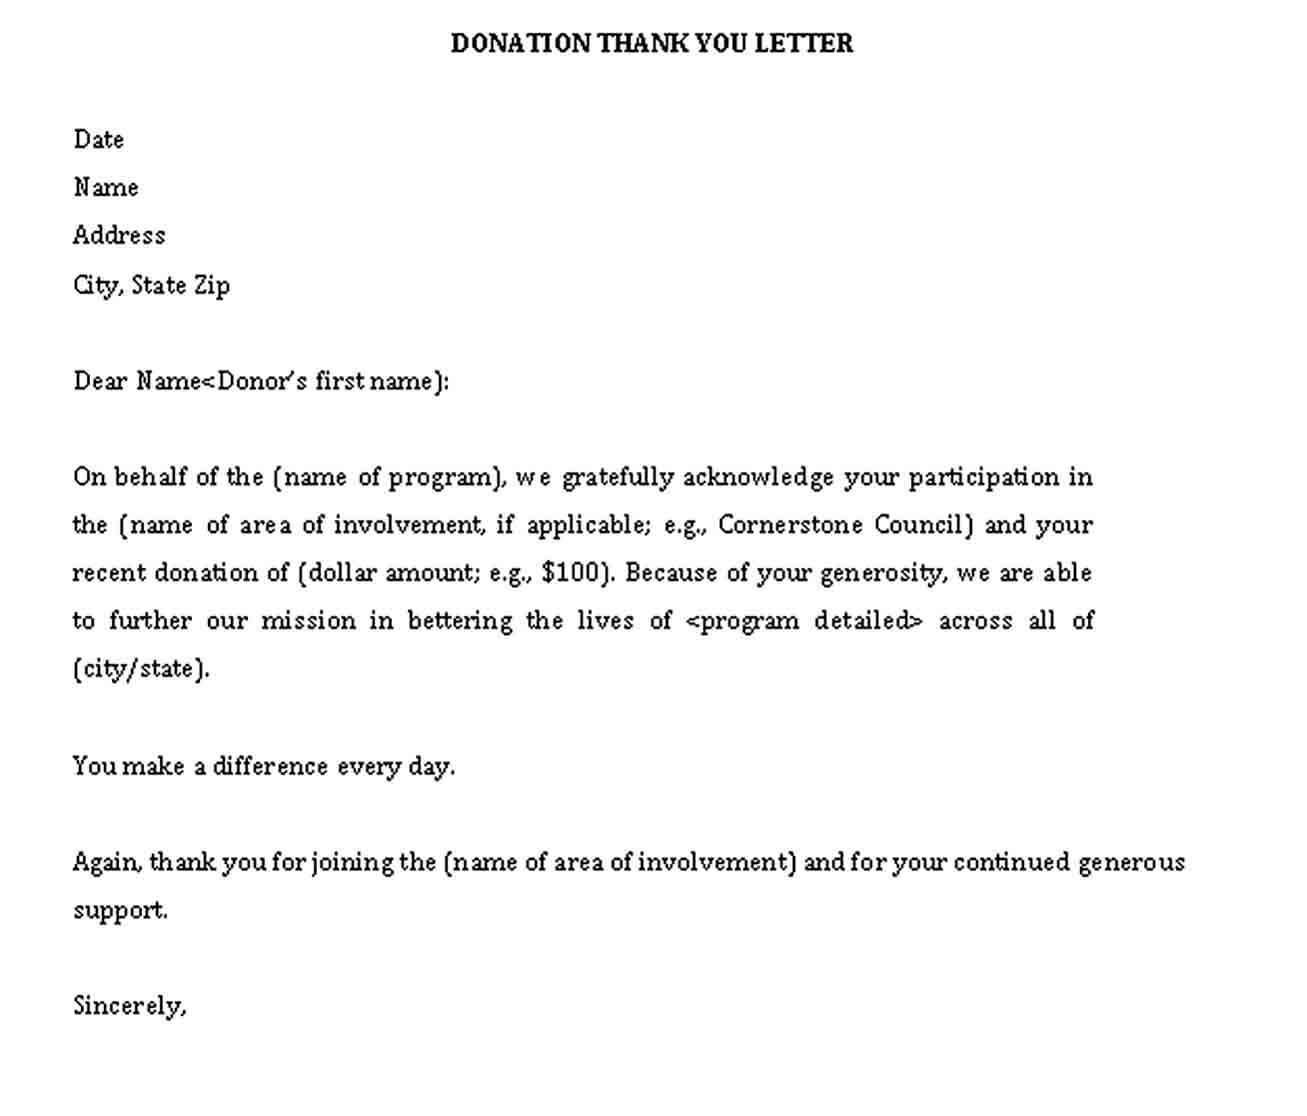 DONATION THANK YOU LETTER1